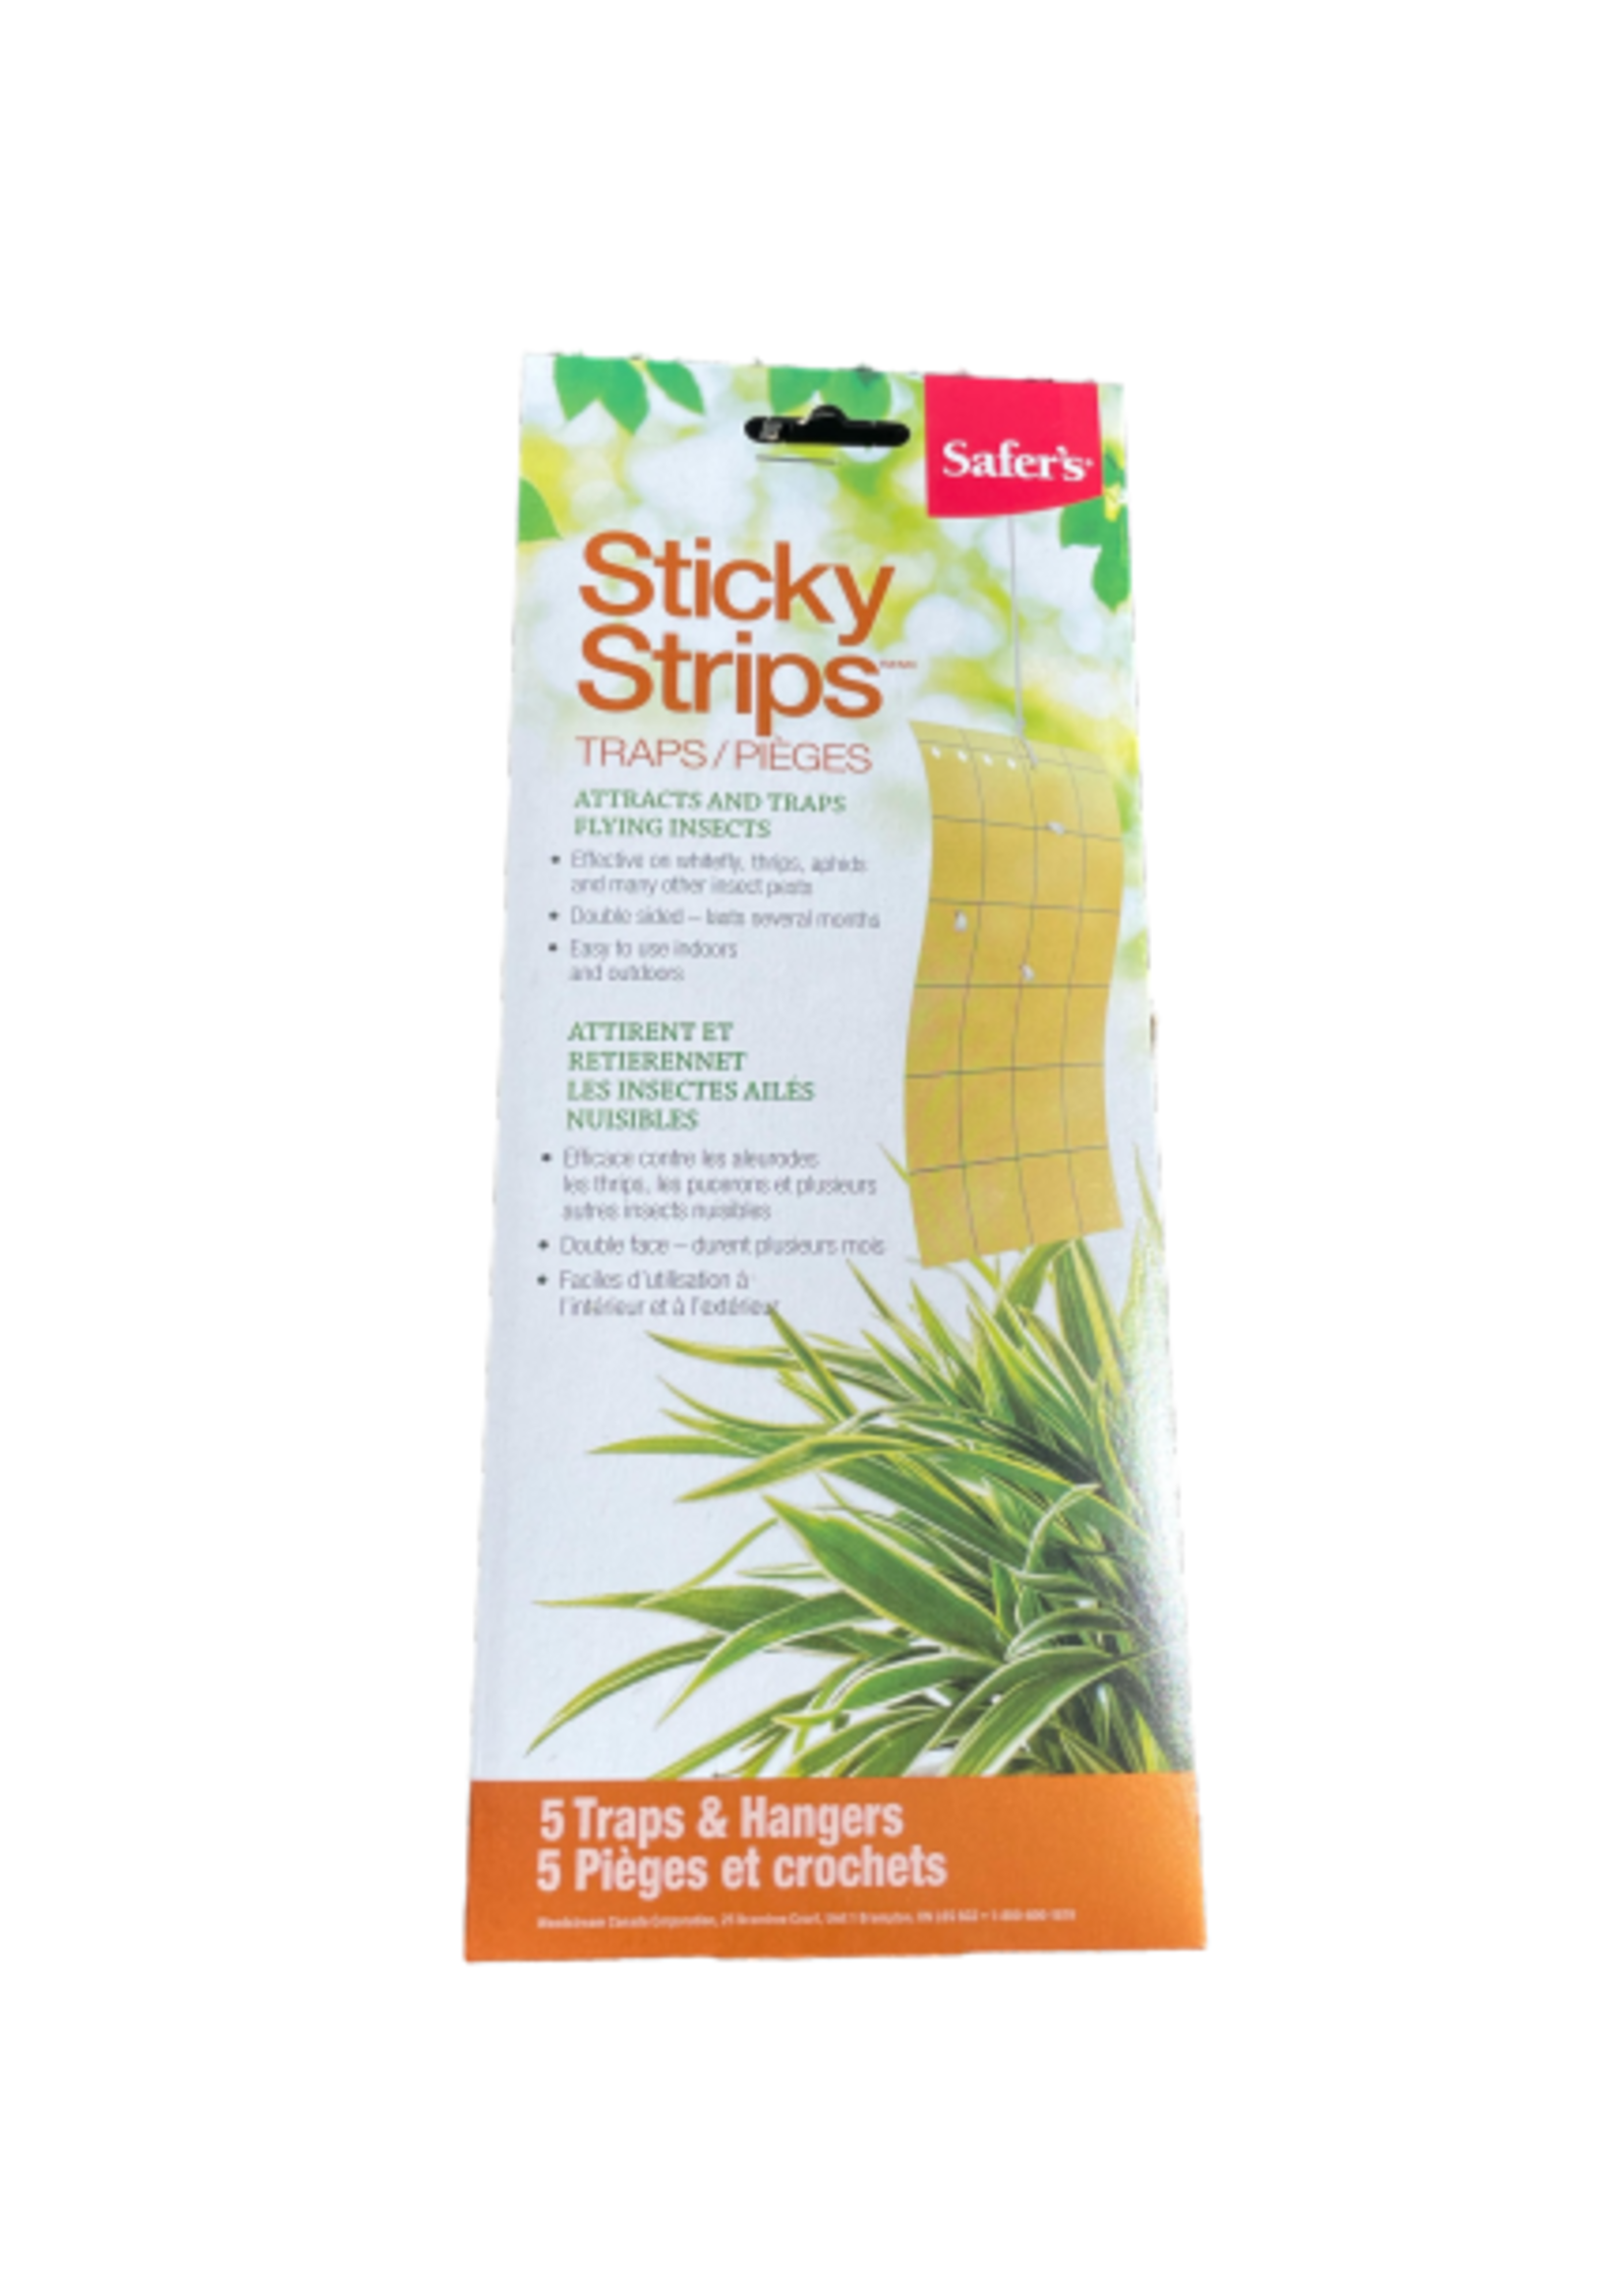 Safers Safer’s® Sticky Strips™ Insect Traps